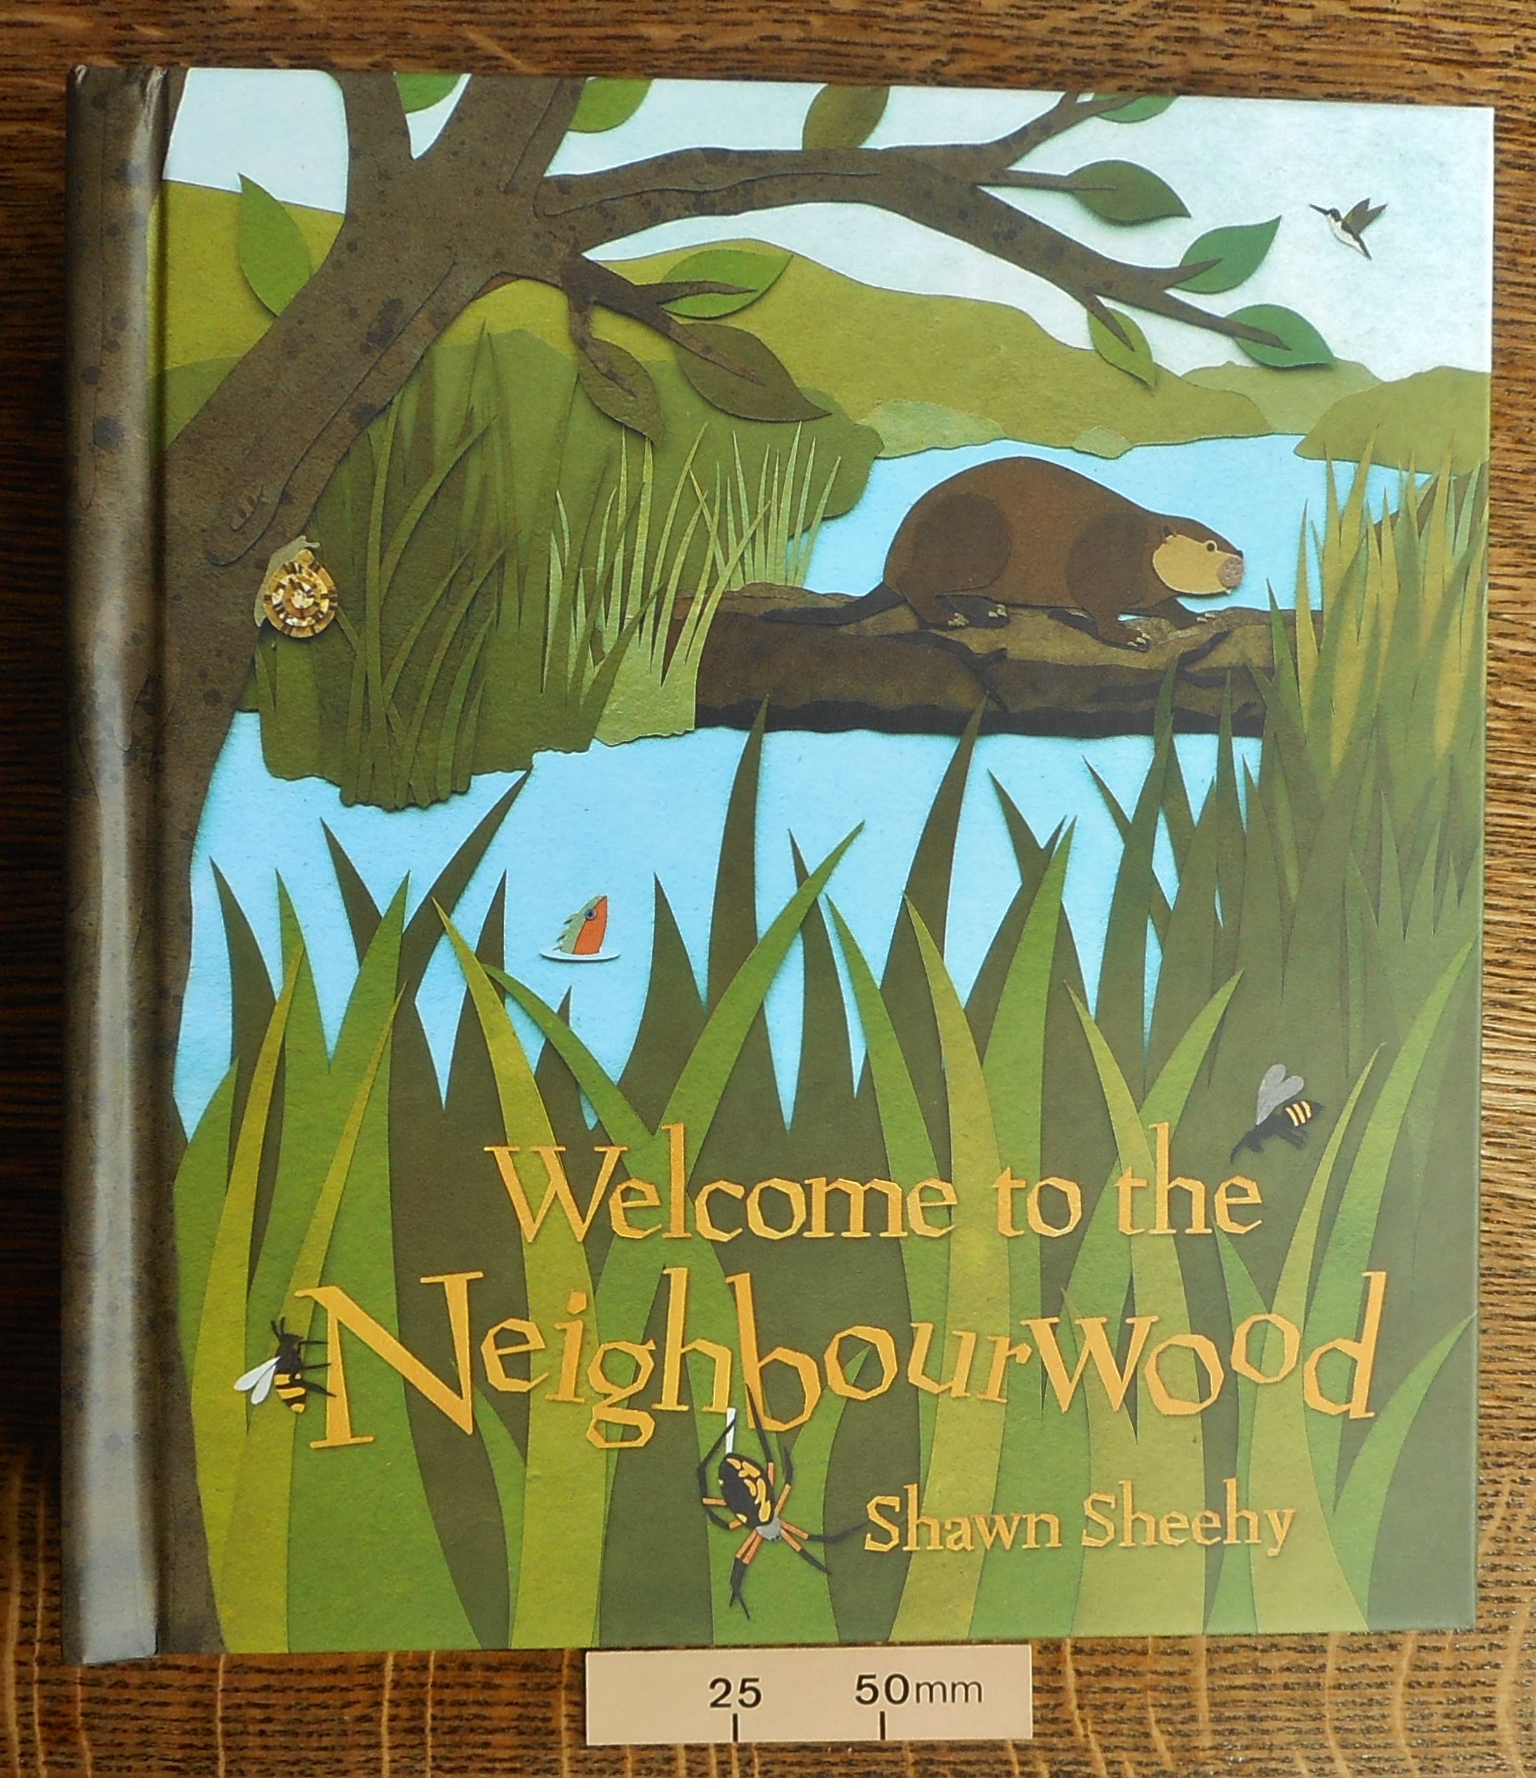 Pop-up book ‘Welcome to the NeighbourWood’ by Shawn Sheehy